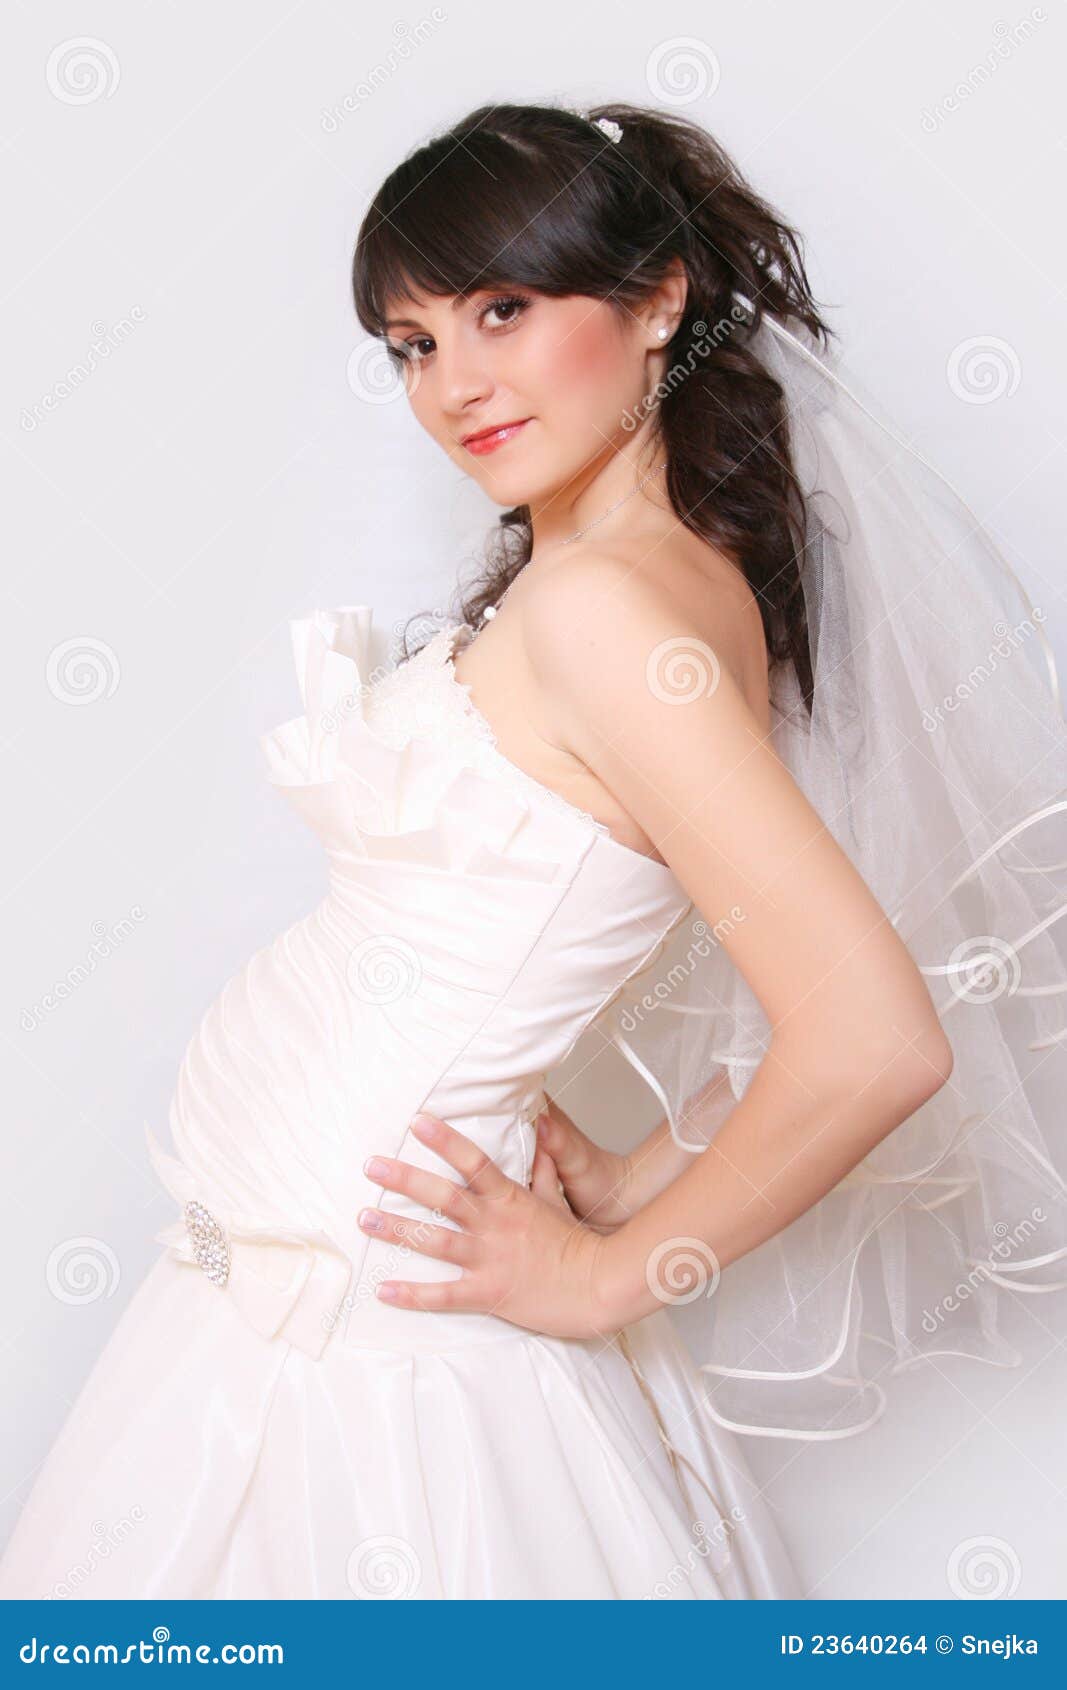 Pregnant bride stock photo. Image of happiness, baby - 23640264